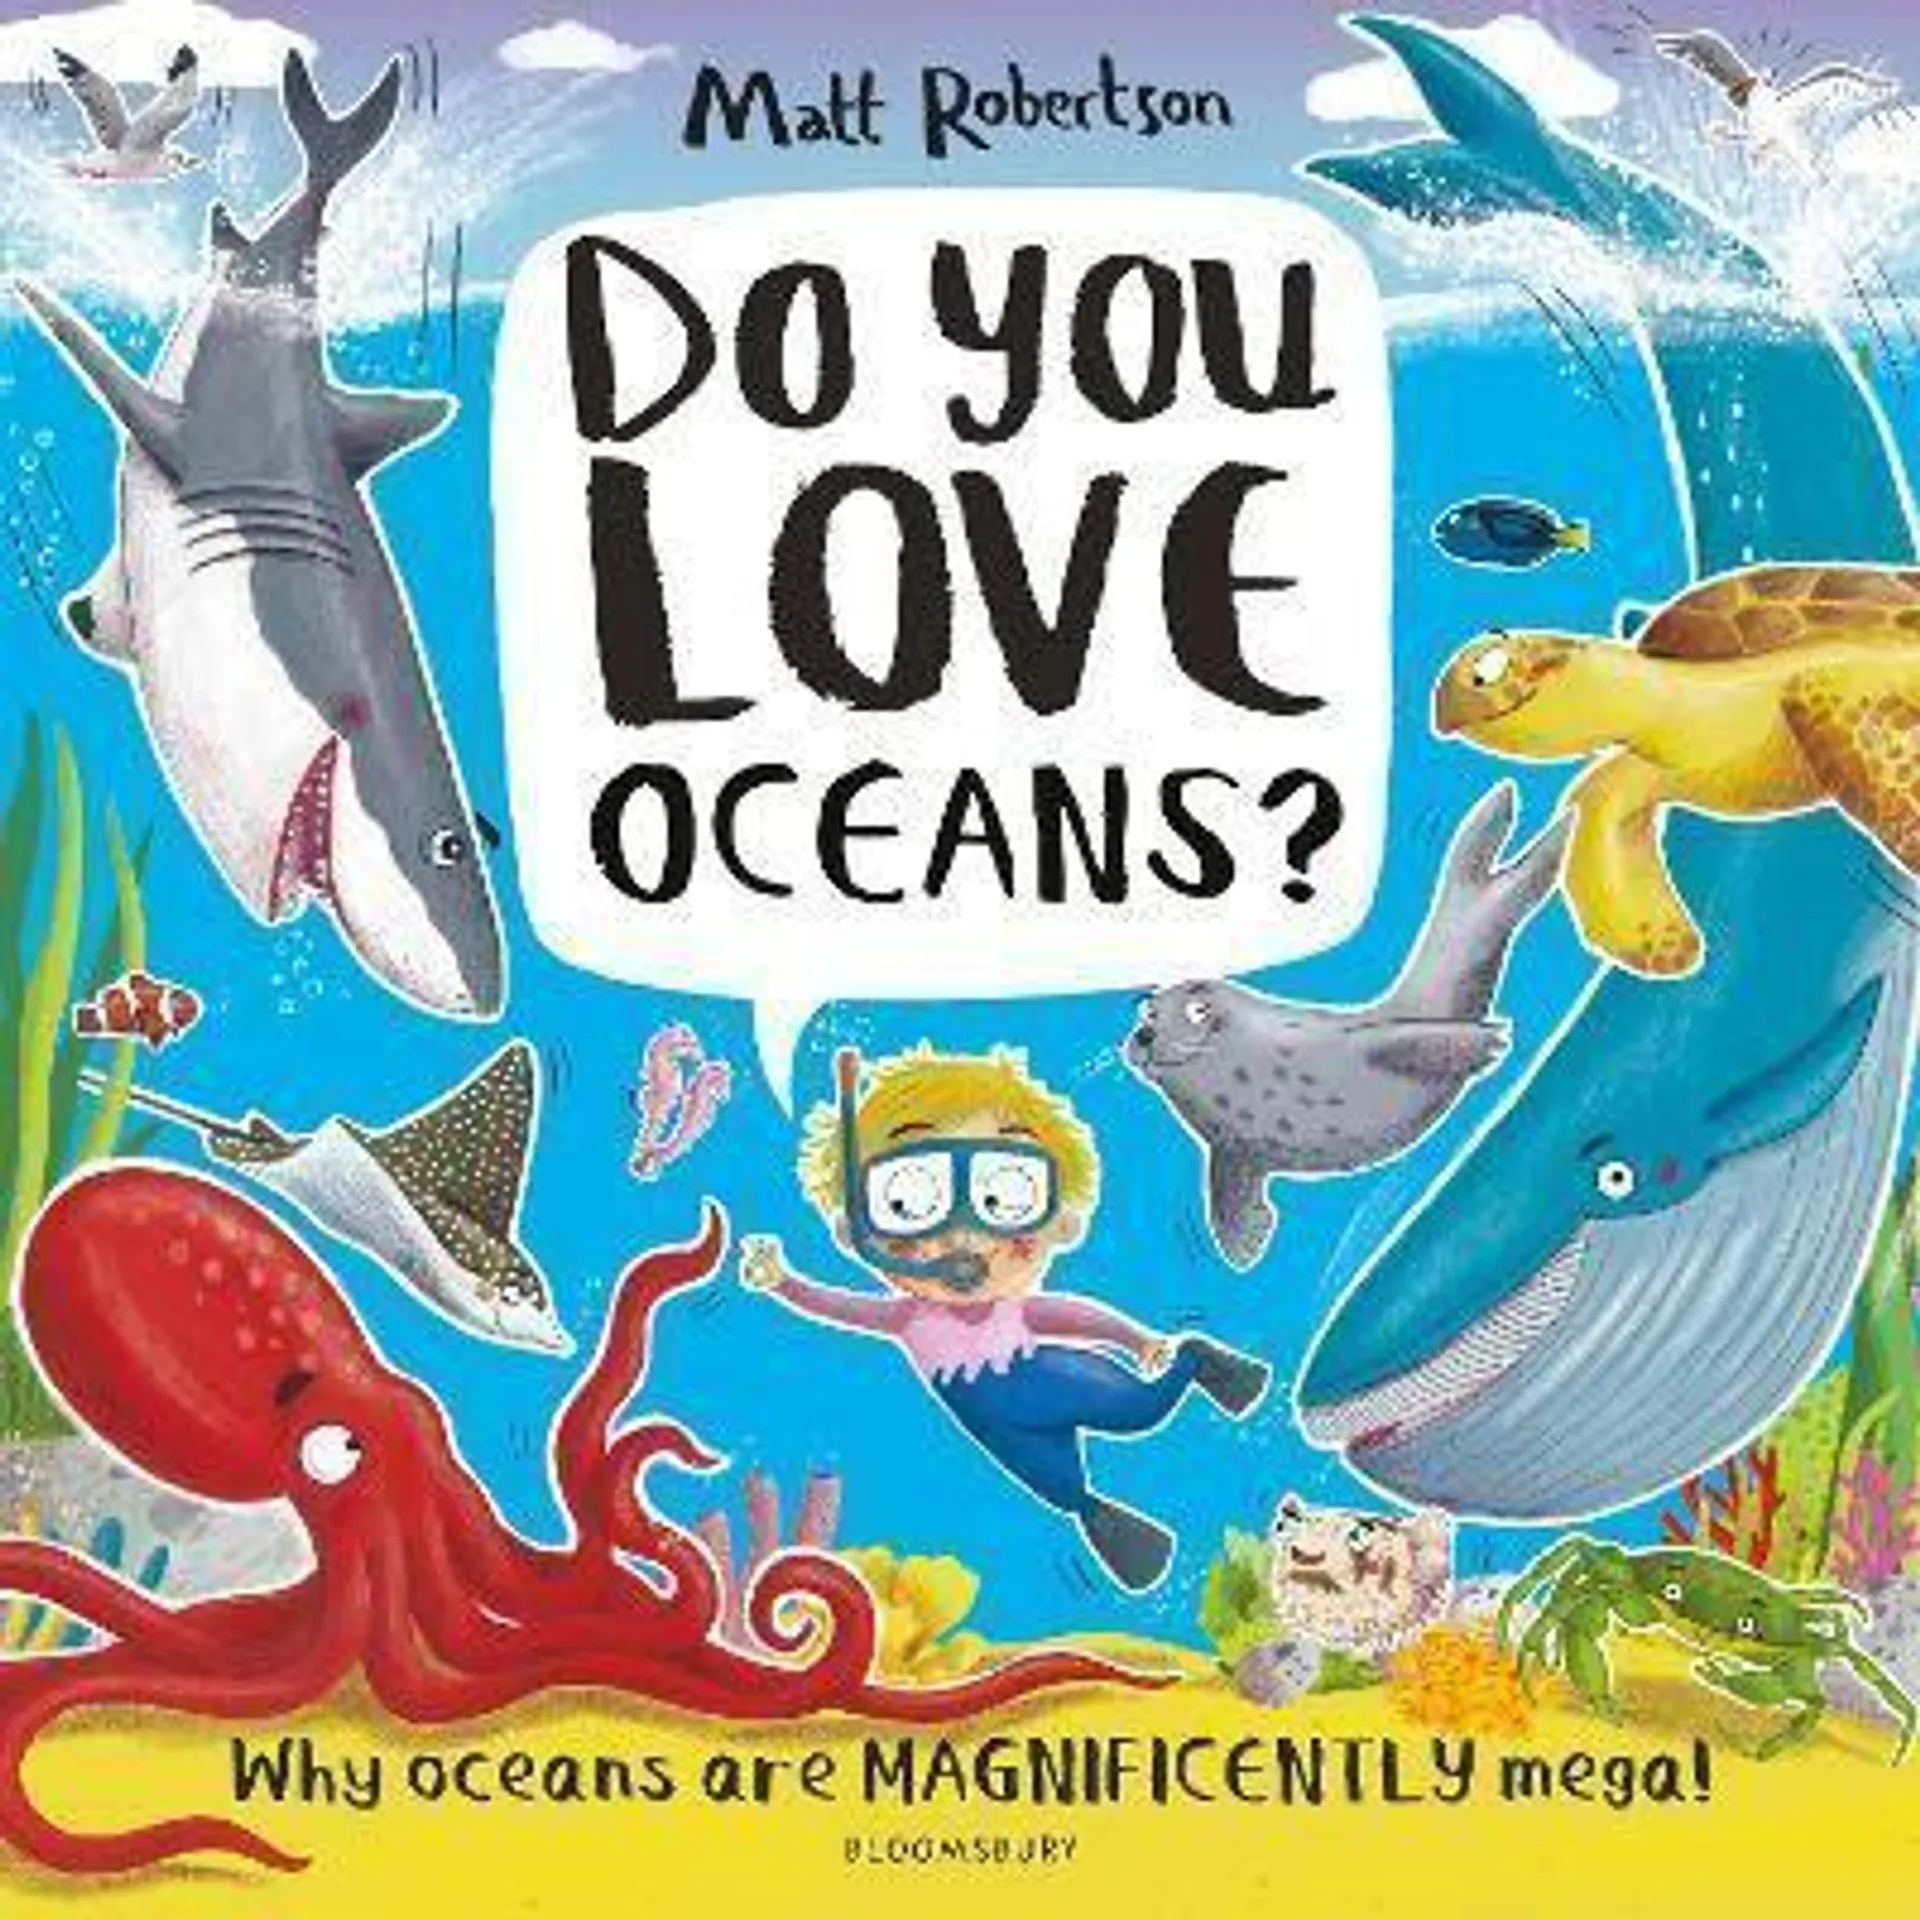 Why oceans are magnificently mega!